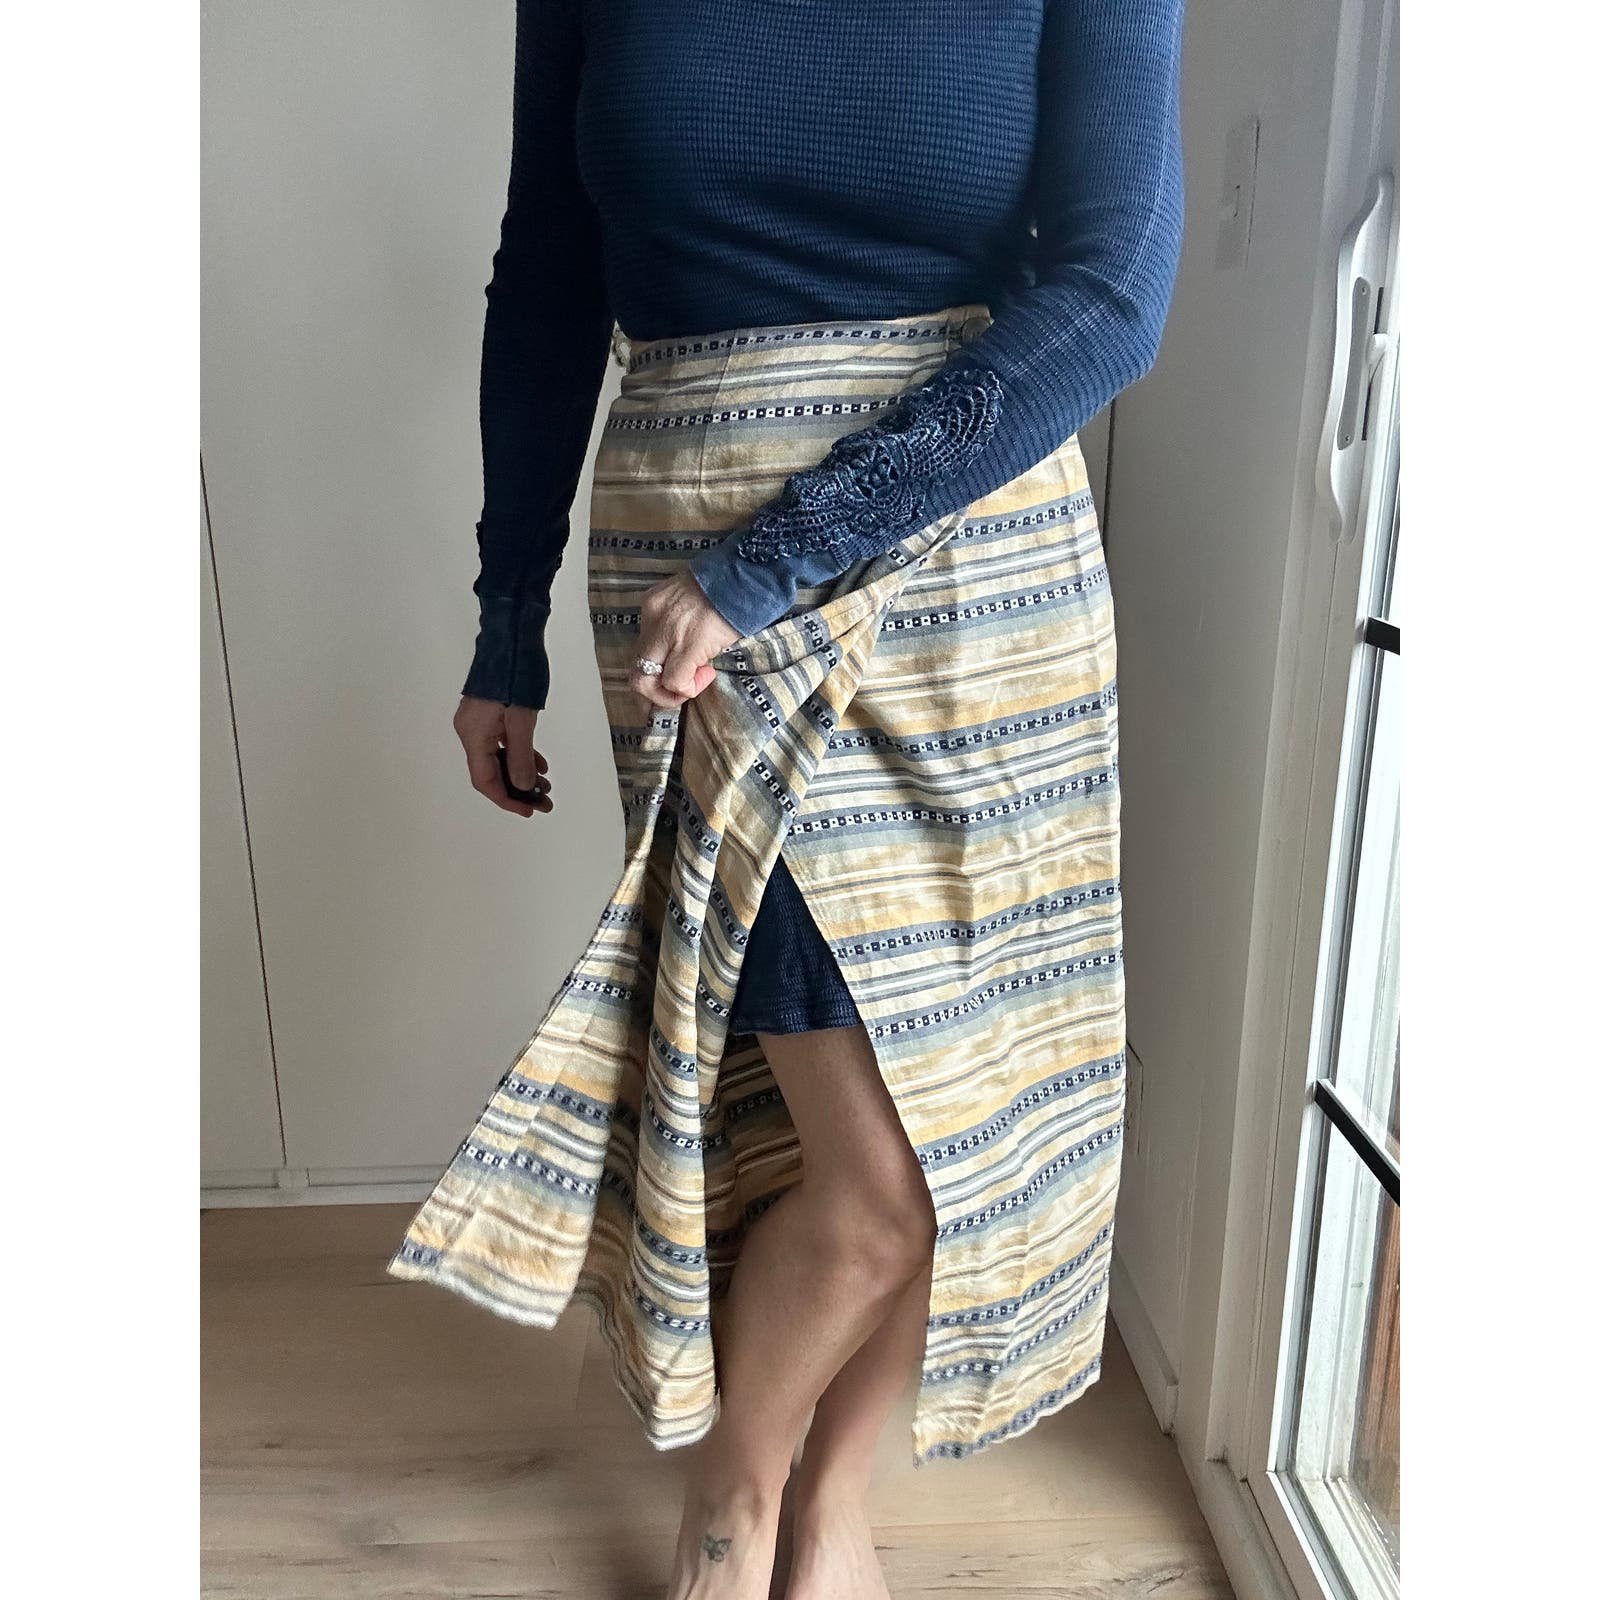 cheapest place to buy  Vintage 90s Country Western Wrap Skirt Southwestern Midi length Cowgirl  Size 8 h0E08ZLIO just for you